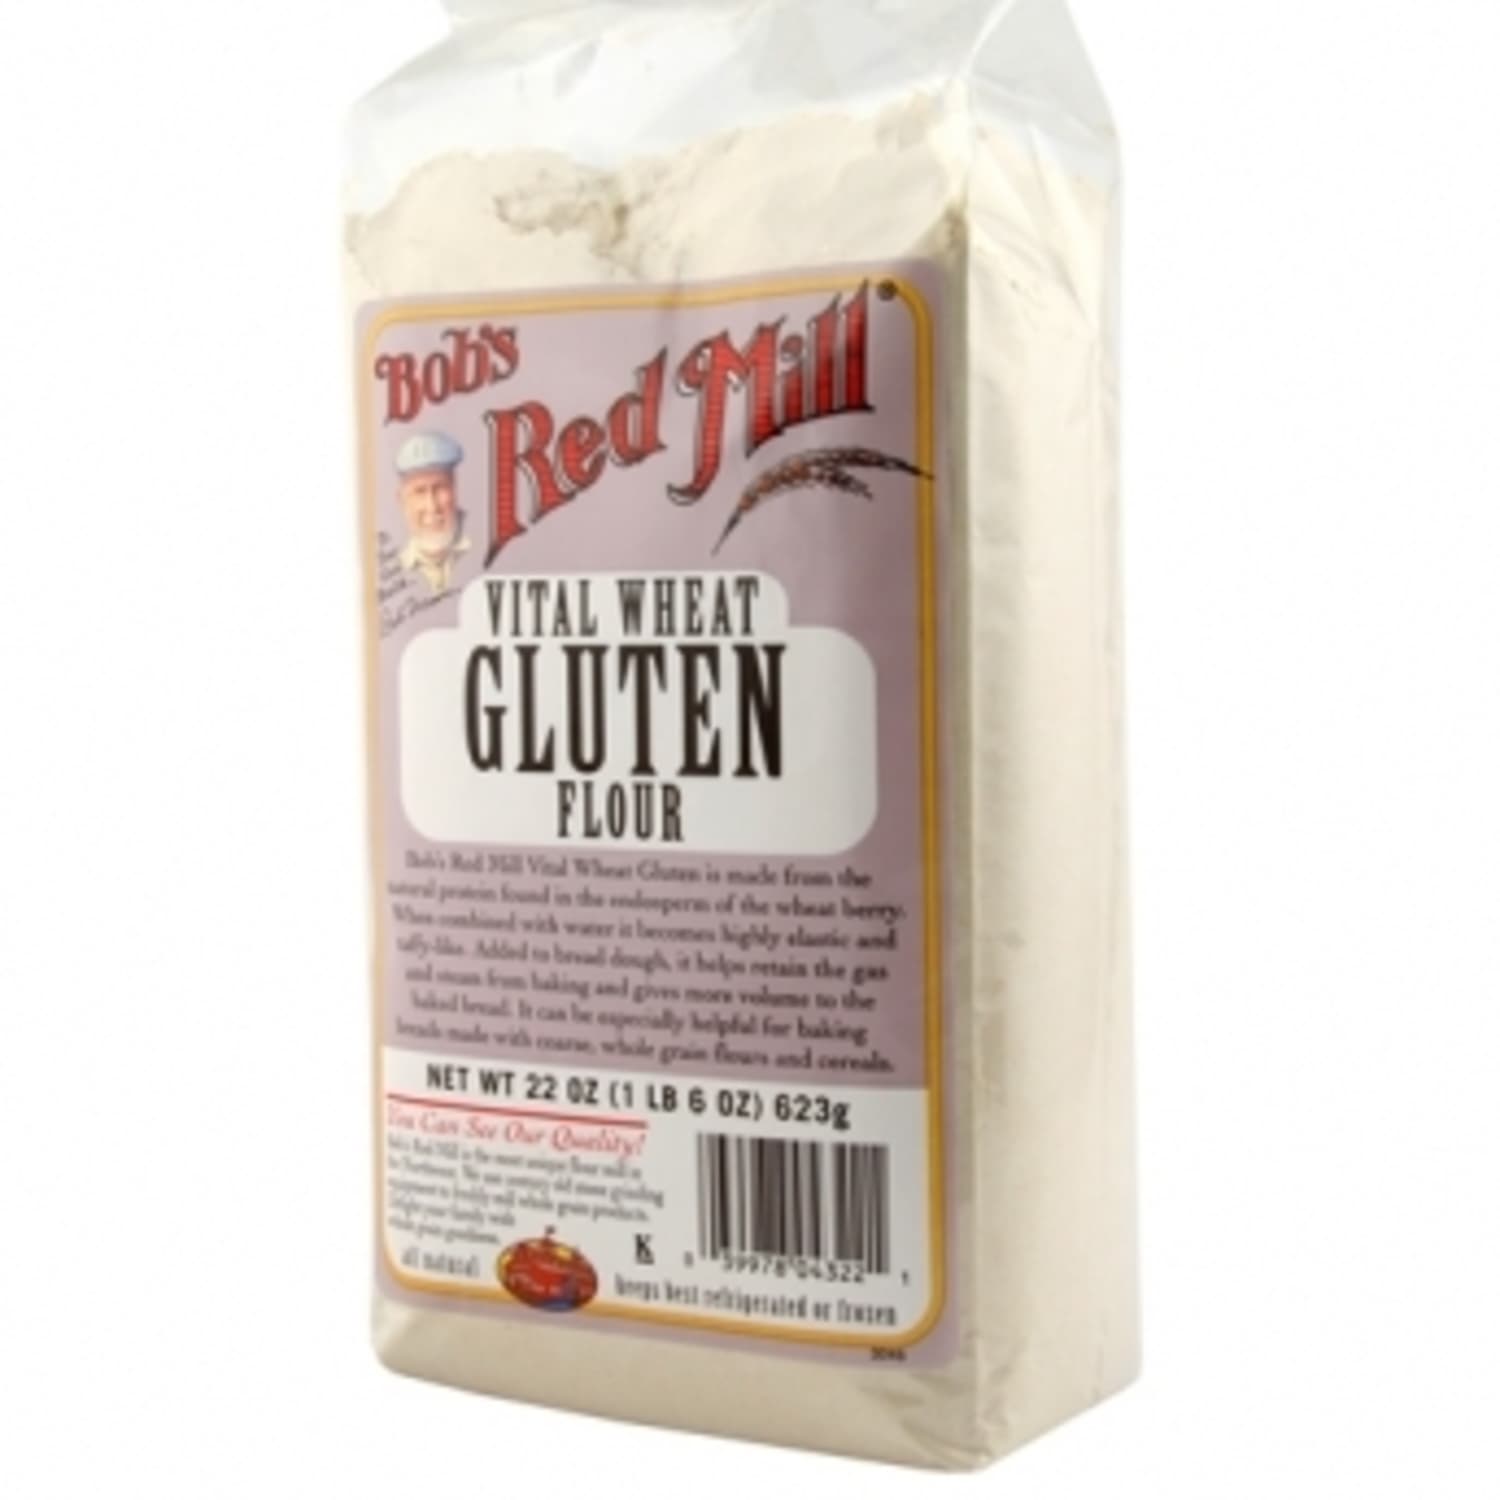 What Is Vital Wheat Gluten and How To Use It